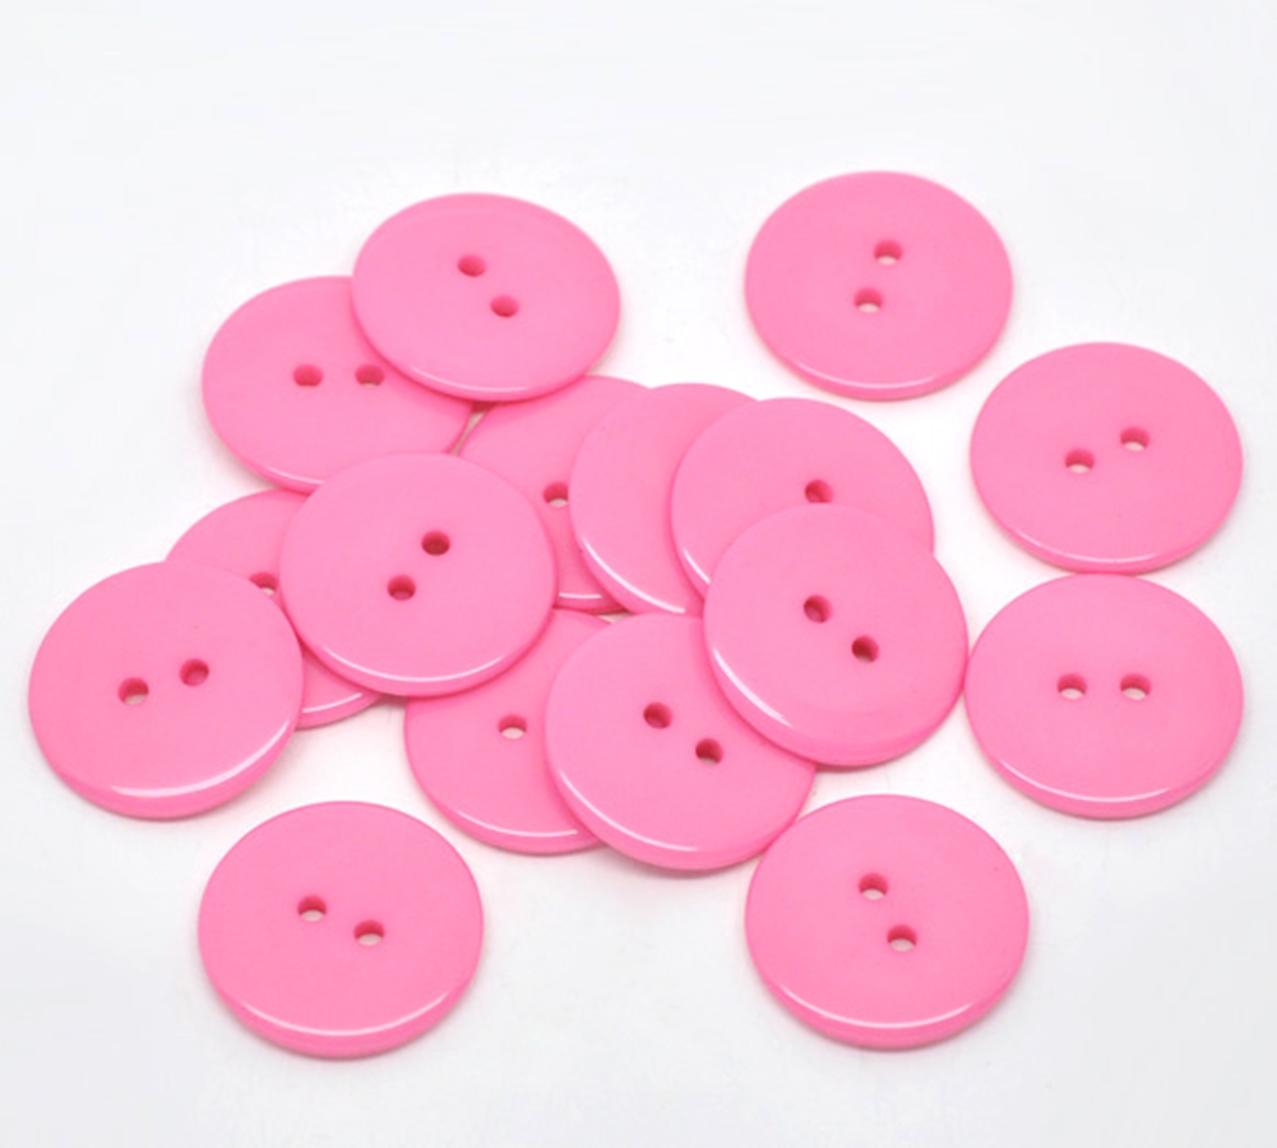 Fuchsia 23mm round large resin sewing buttons